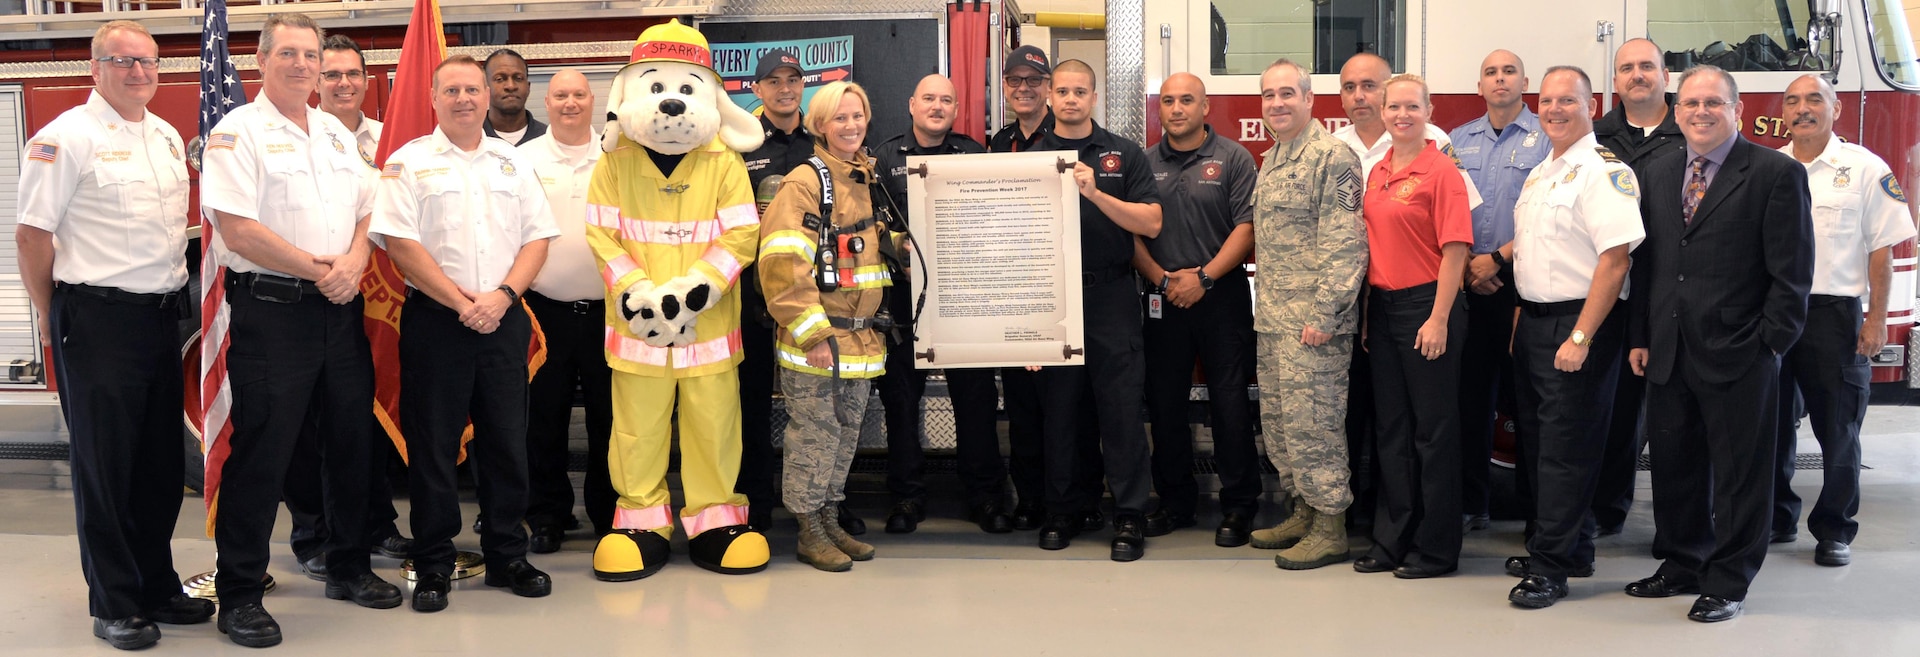 Brig. Gen. Heather Pringle, commander, 502nd Air Base Wing and Joint Base San Antonio, signs the Fire Prevention Week proclamation at Fire Station No. 1 at Joint base San Antonio-Fort Sam Houston Sept. 27.